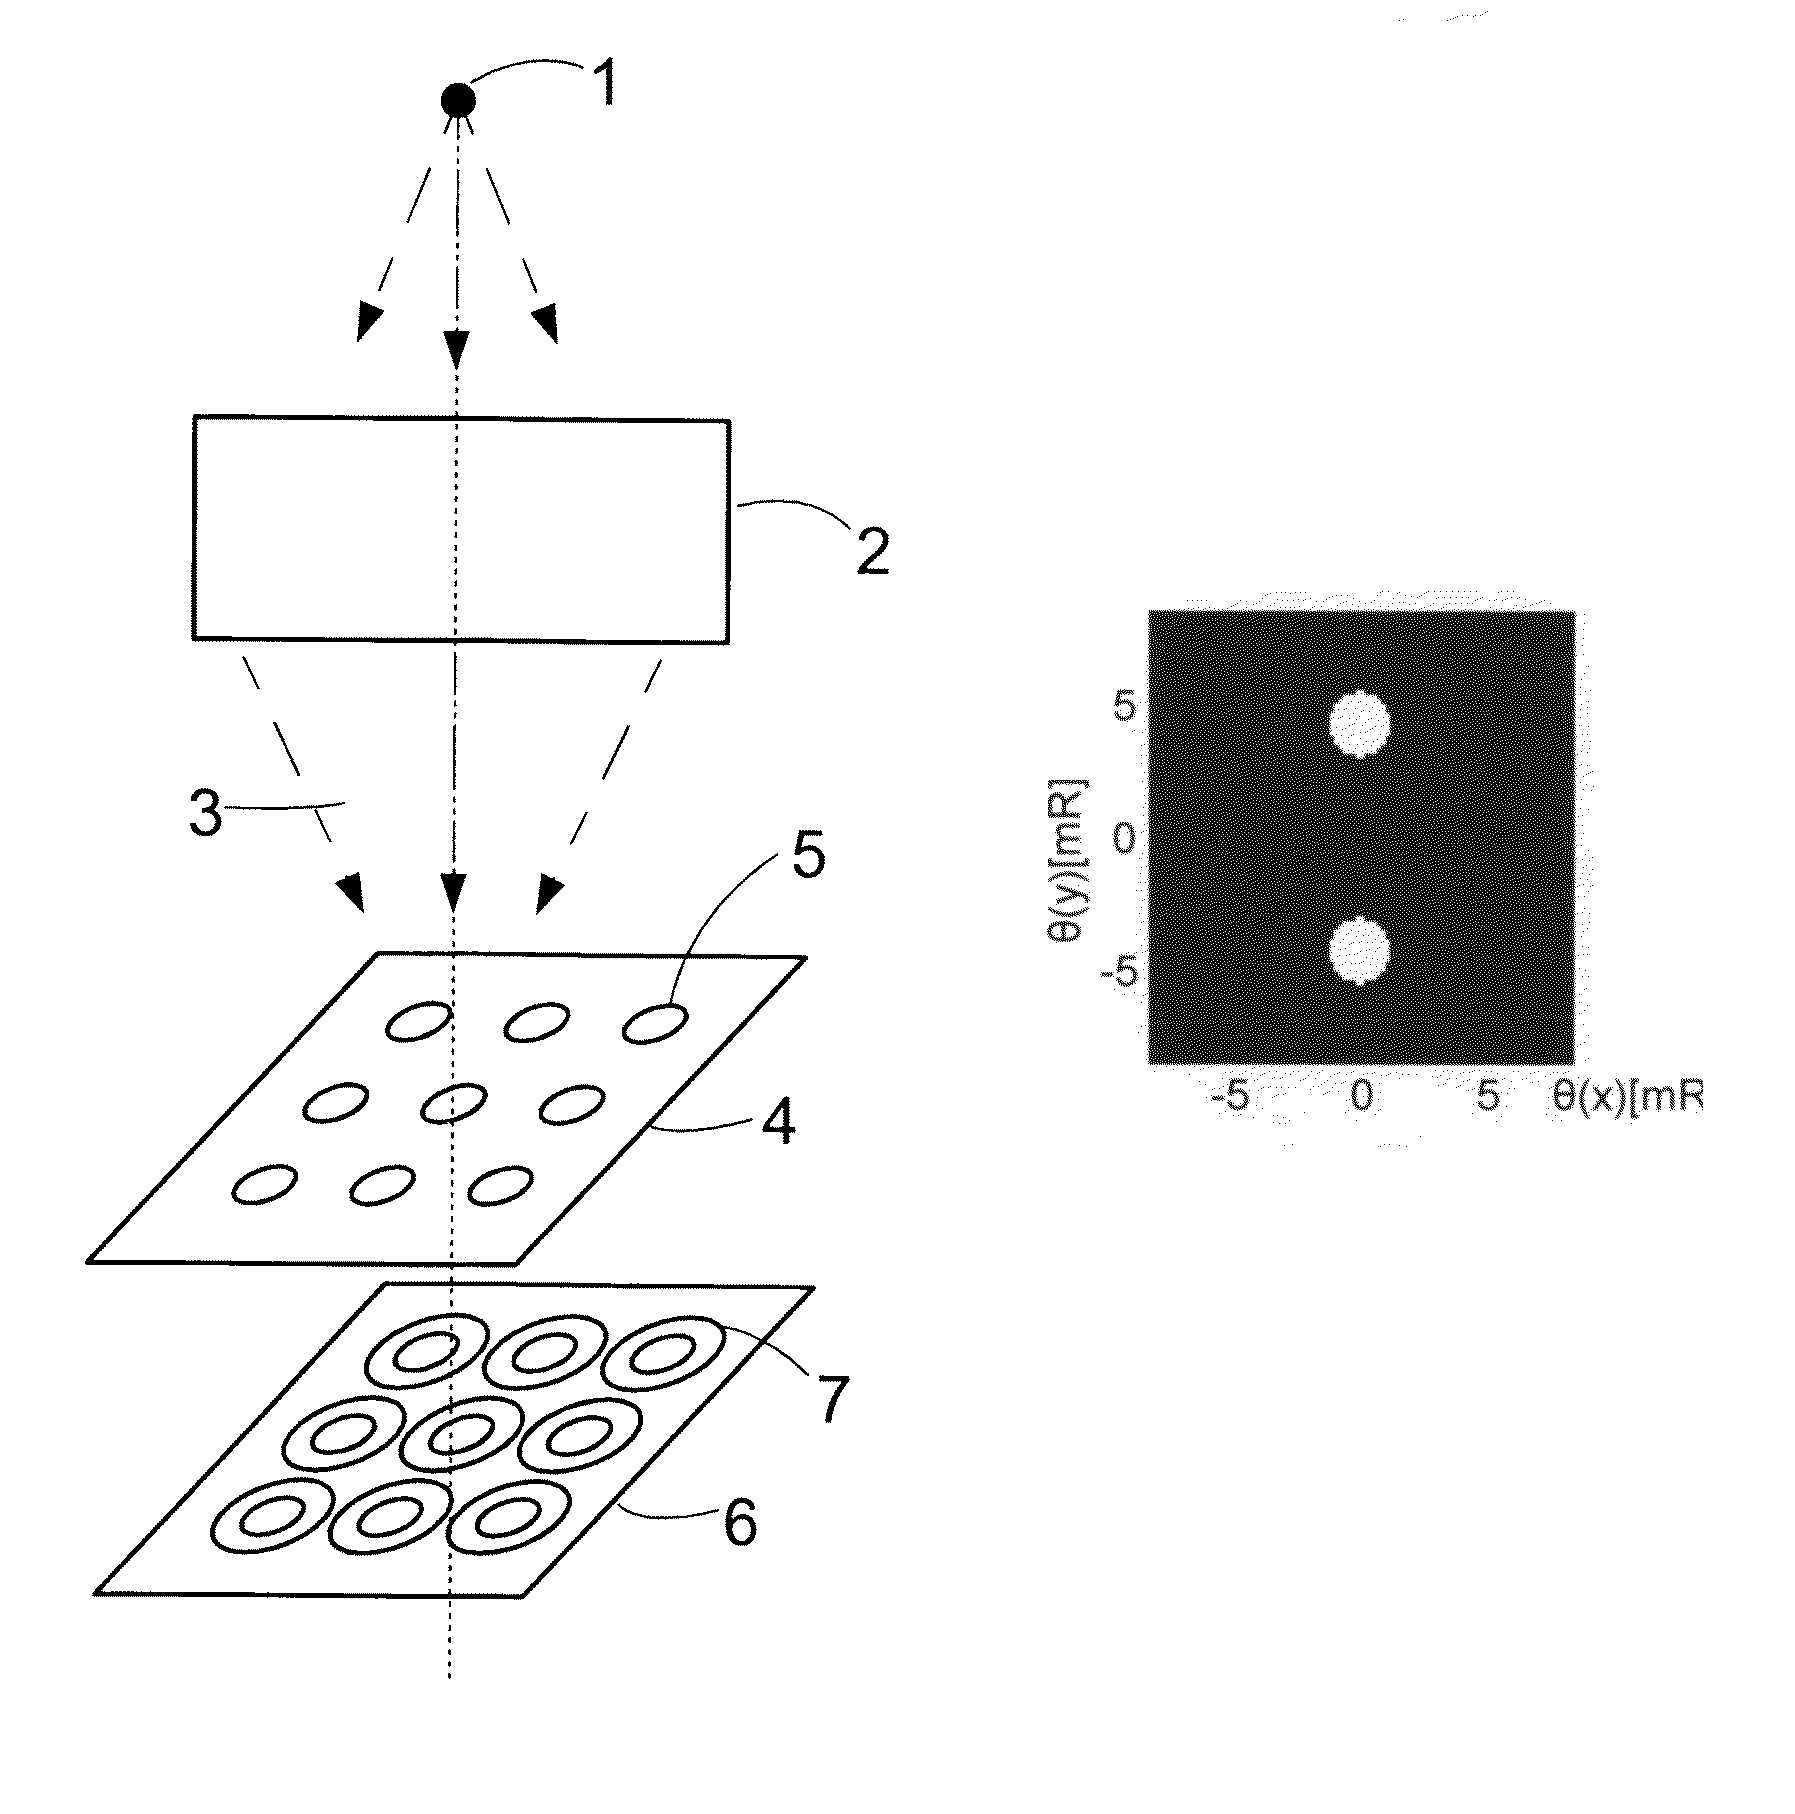 Lithographic fabrication of general periodic structures